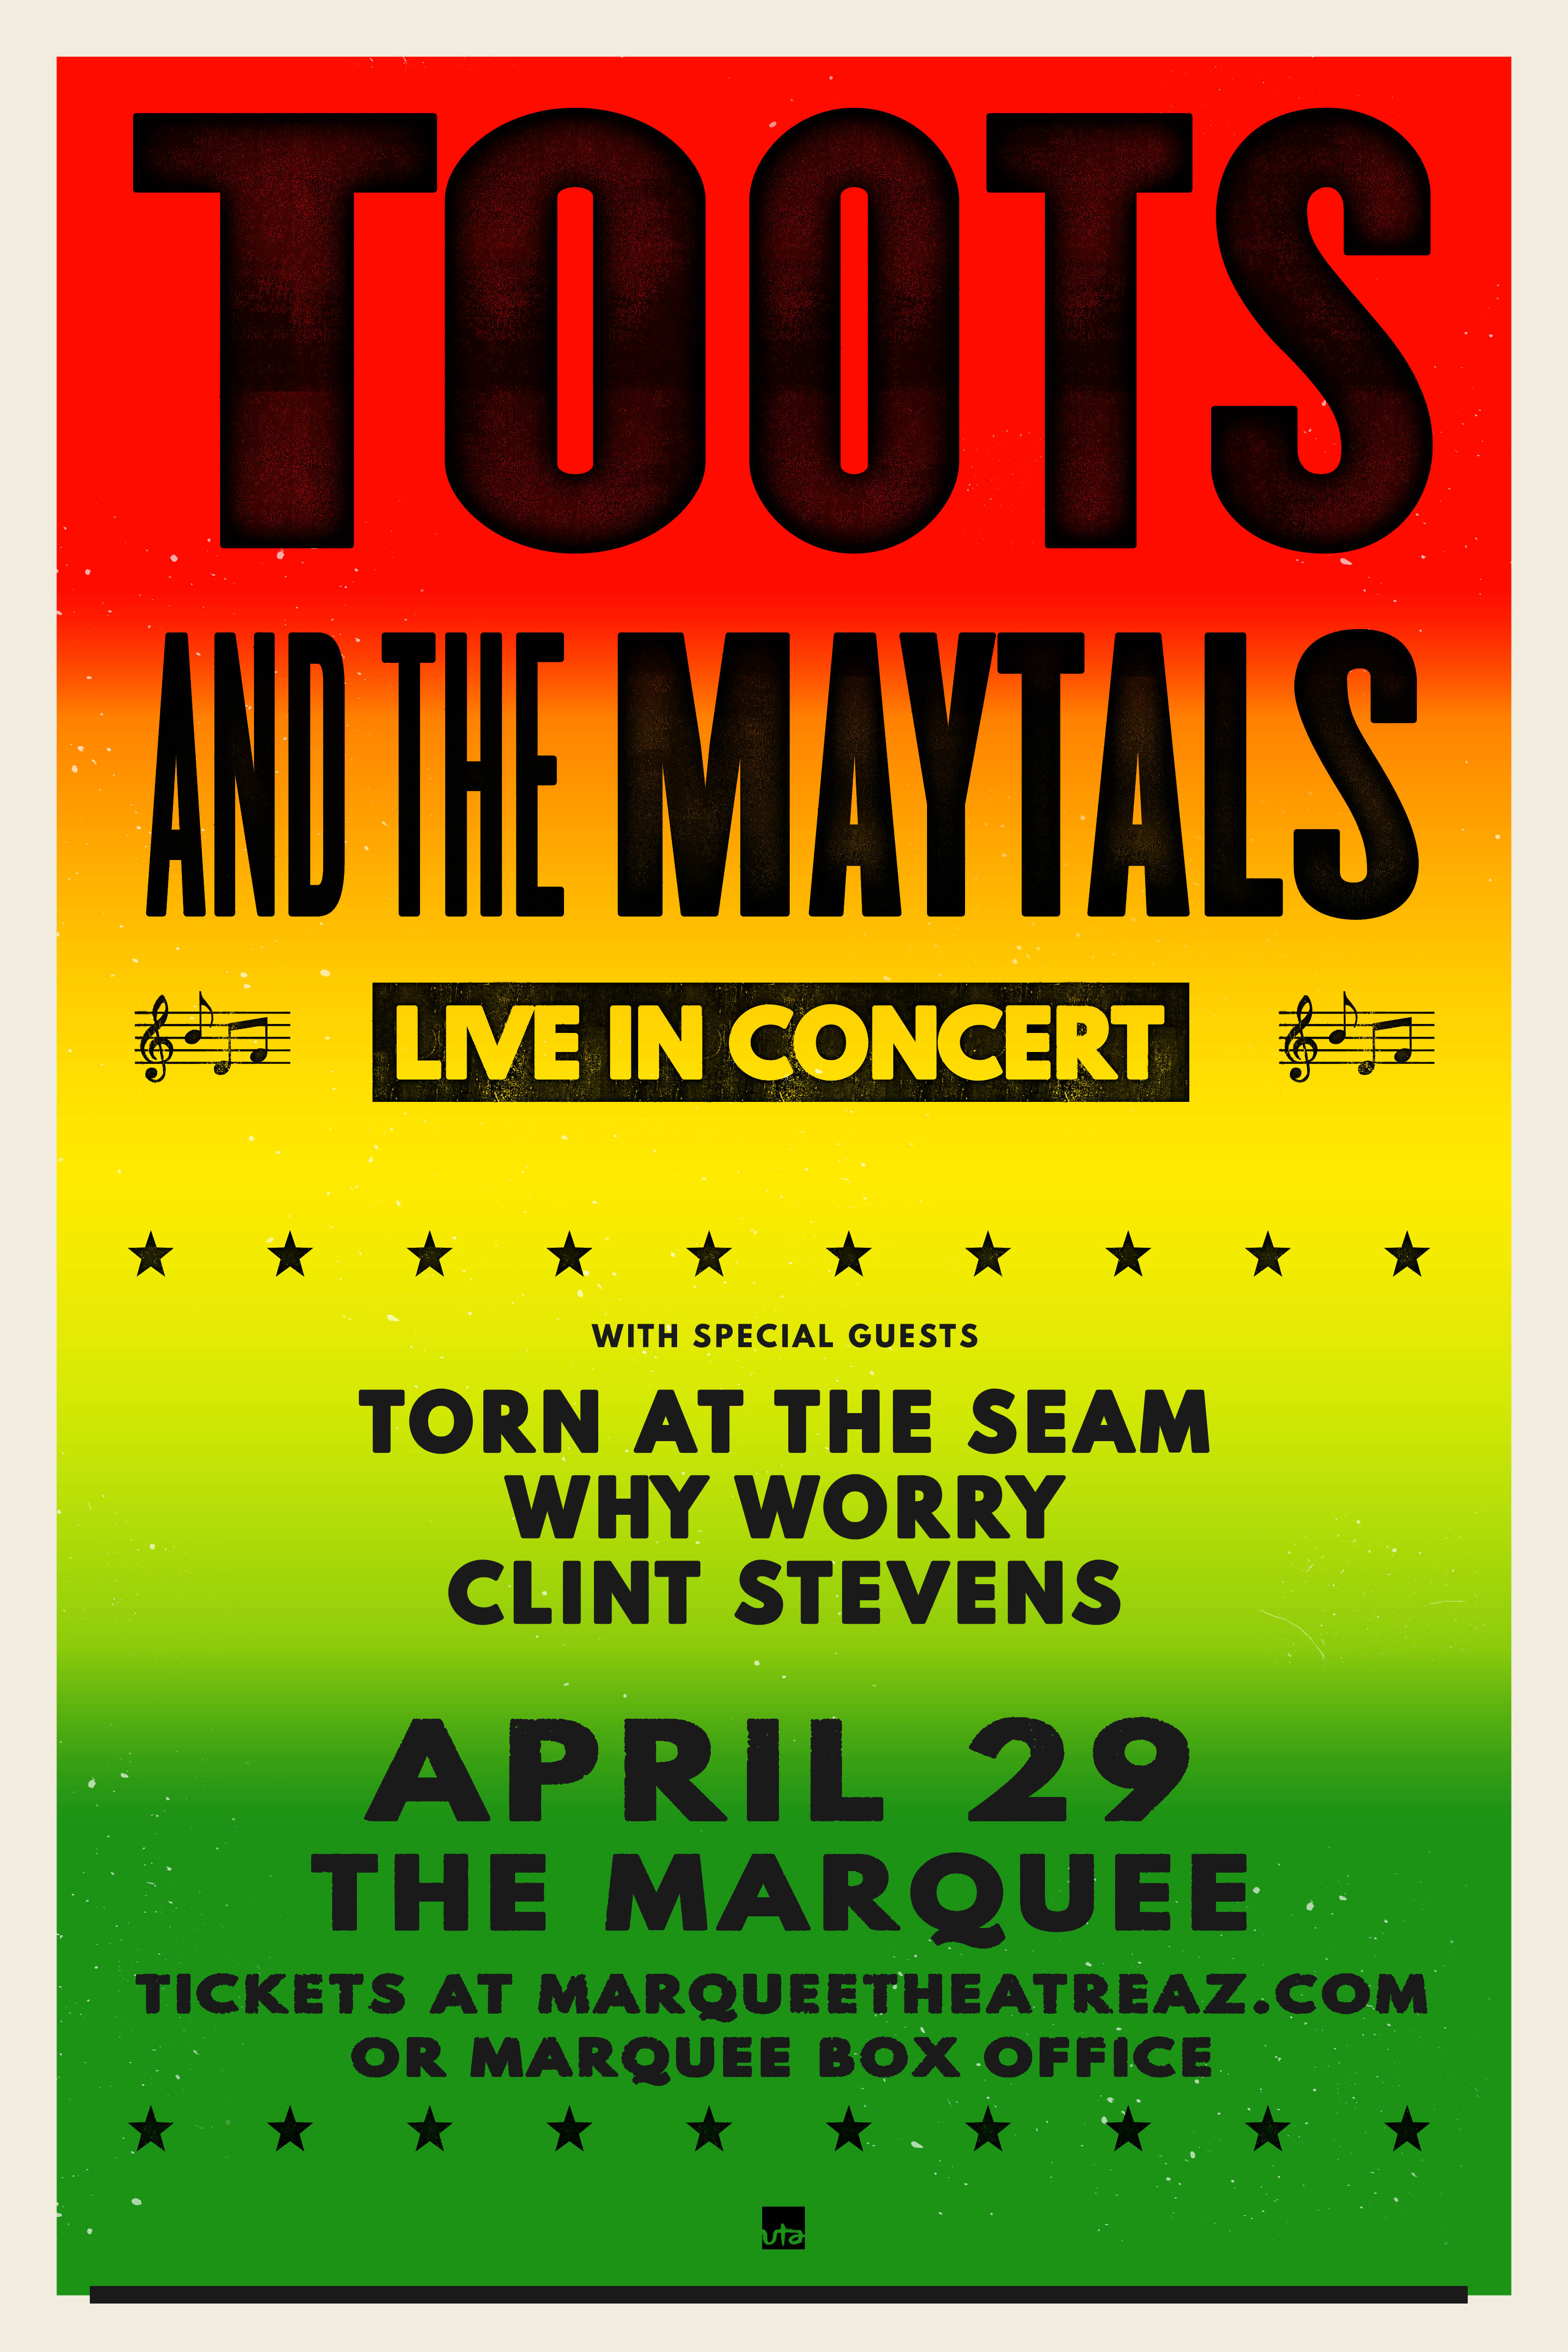 Win tickets to TOOTS & THE MAYTALS live at Marquee Theatre